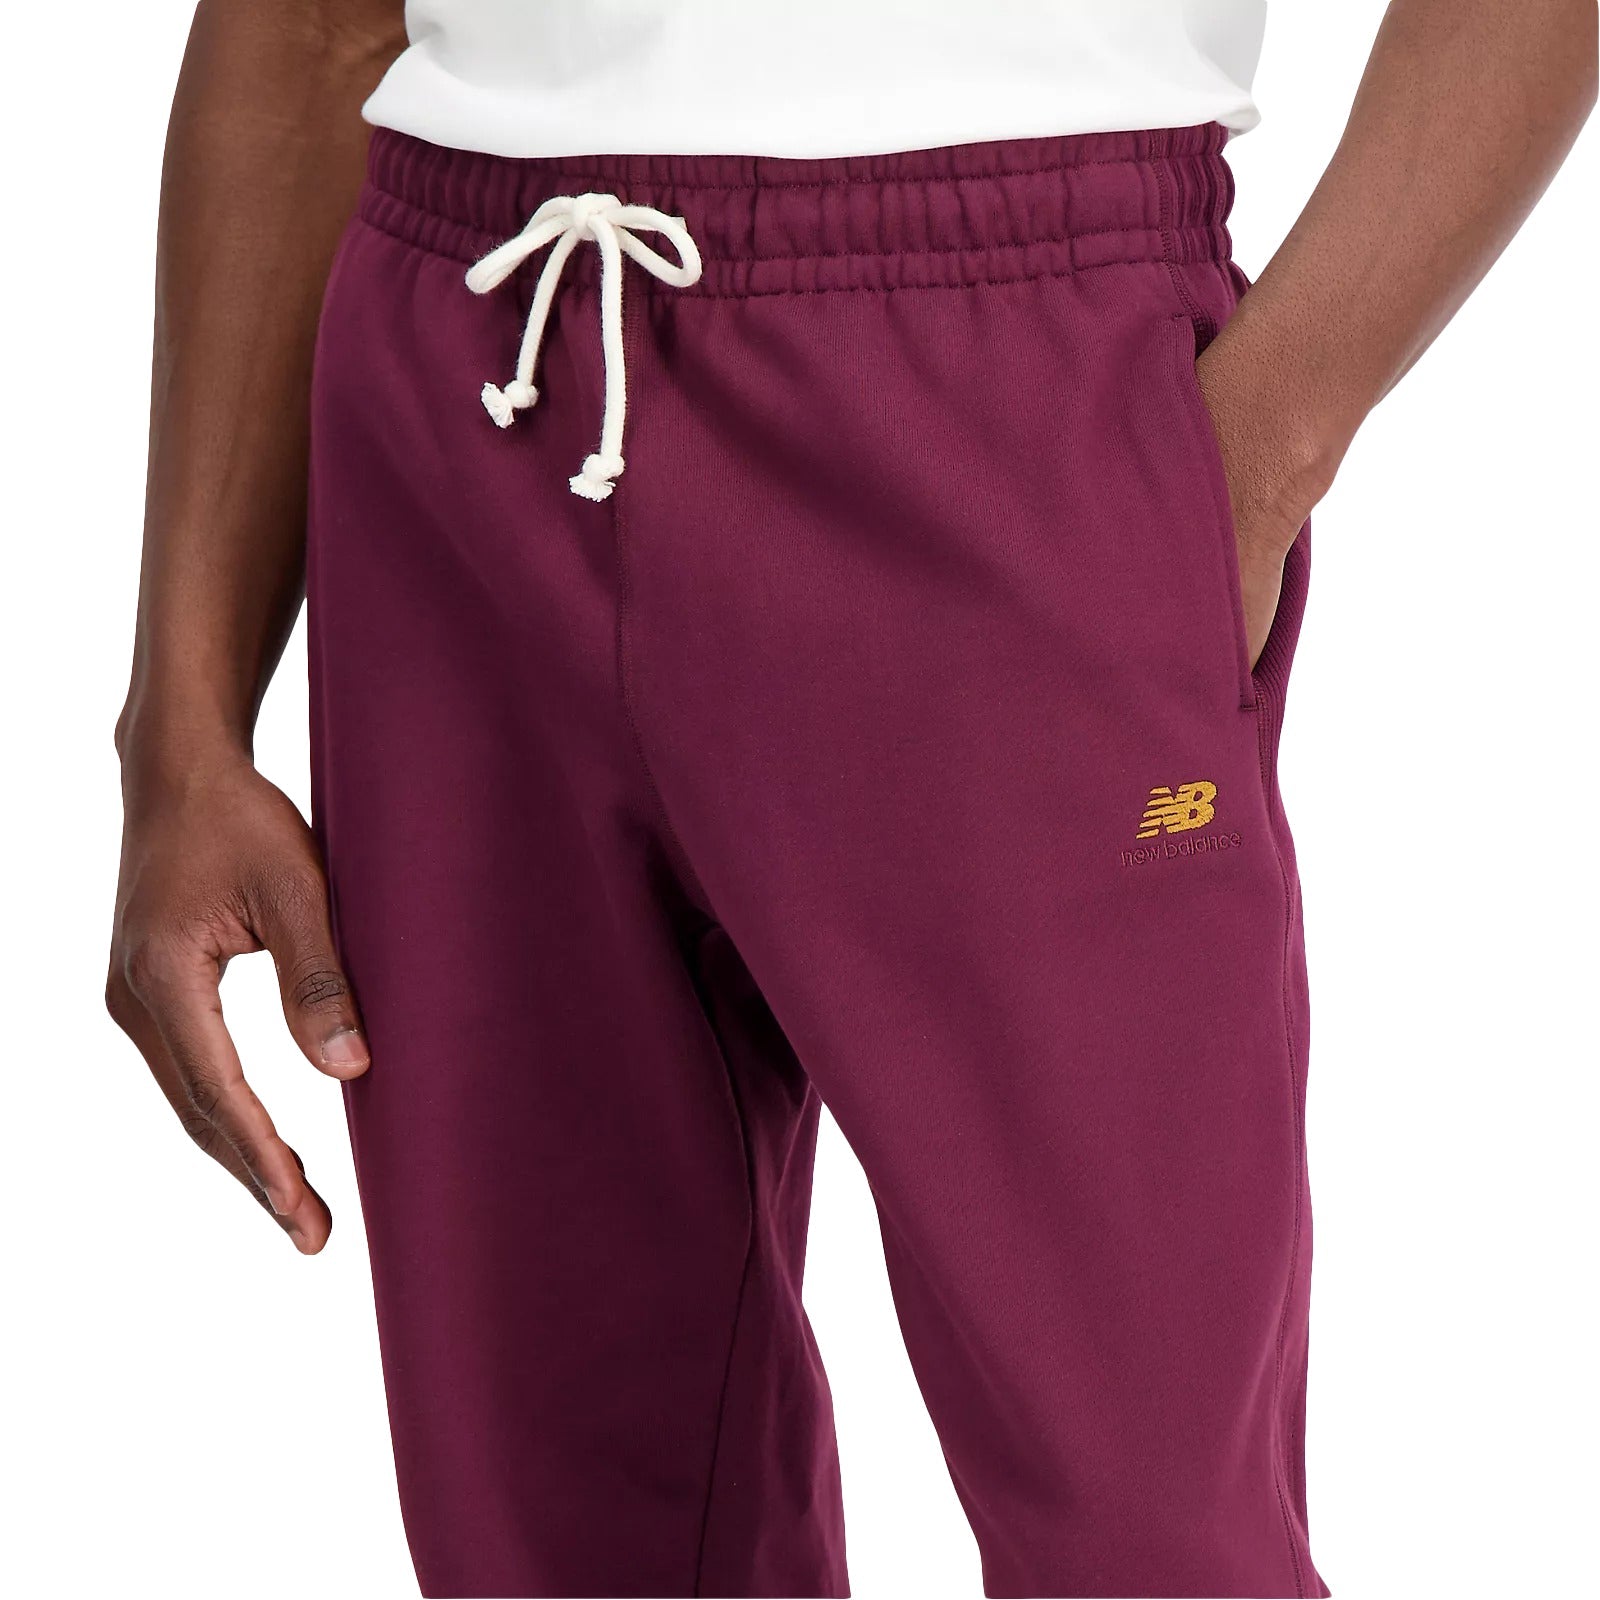 New Balance Men Remastered French Terry Sweatpant Burgundy